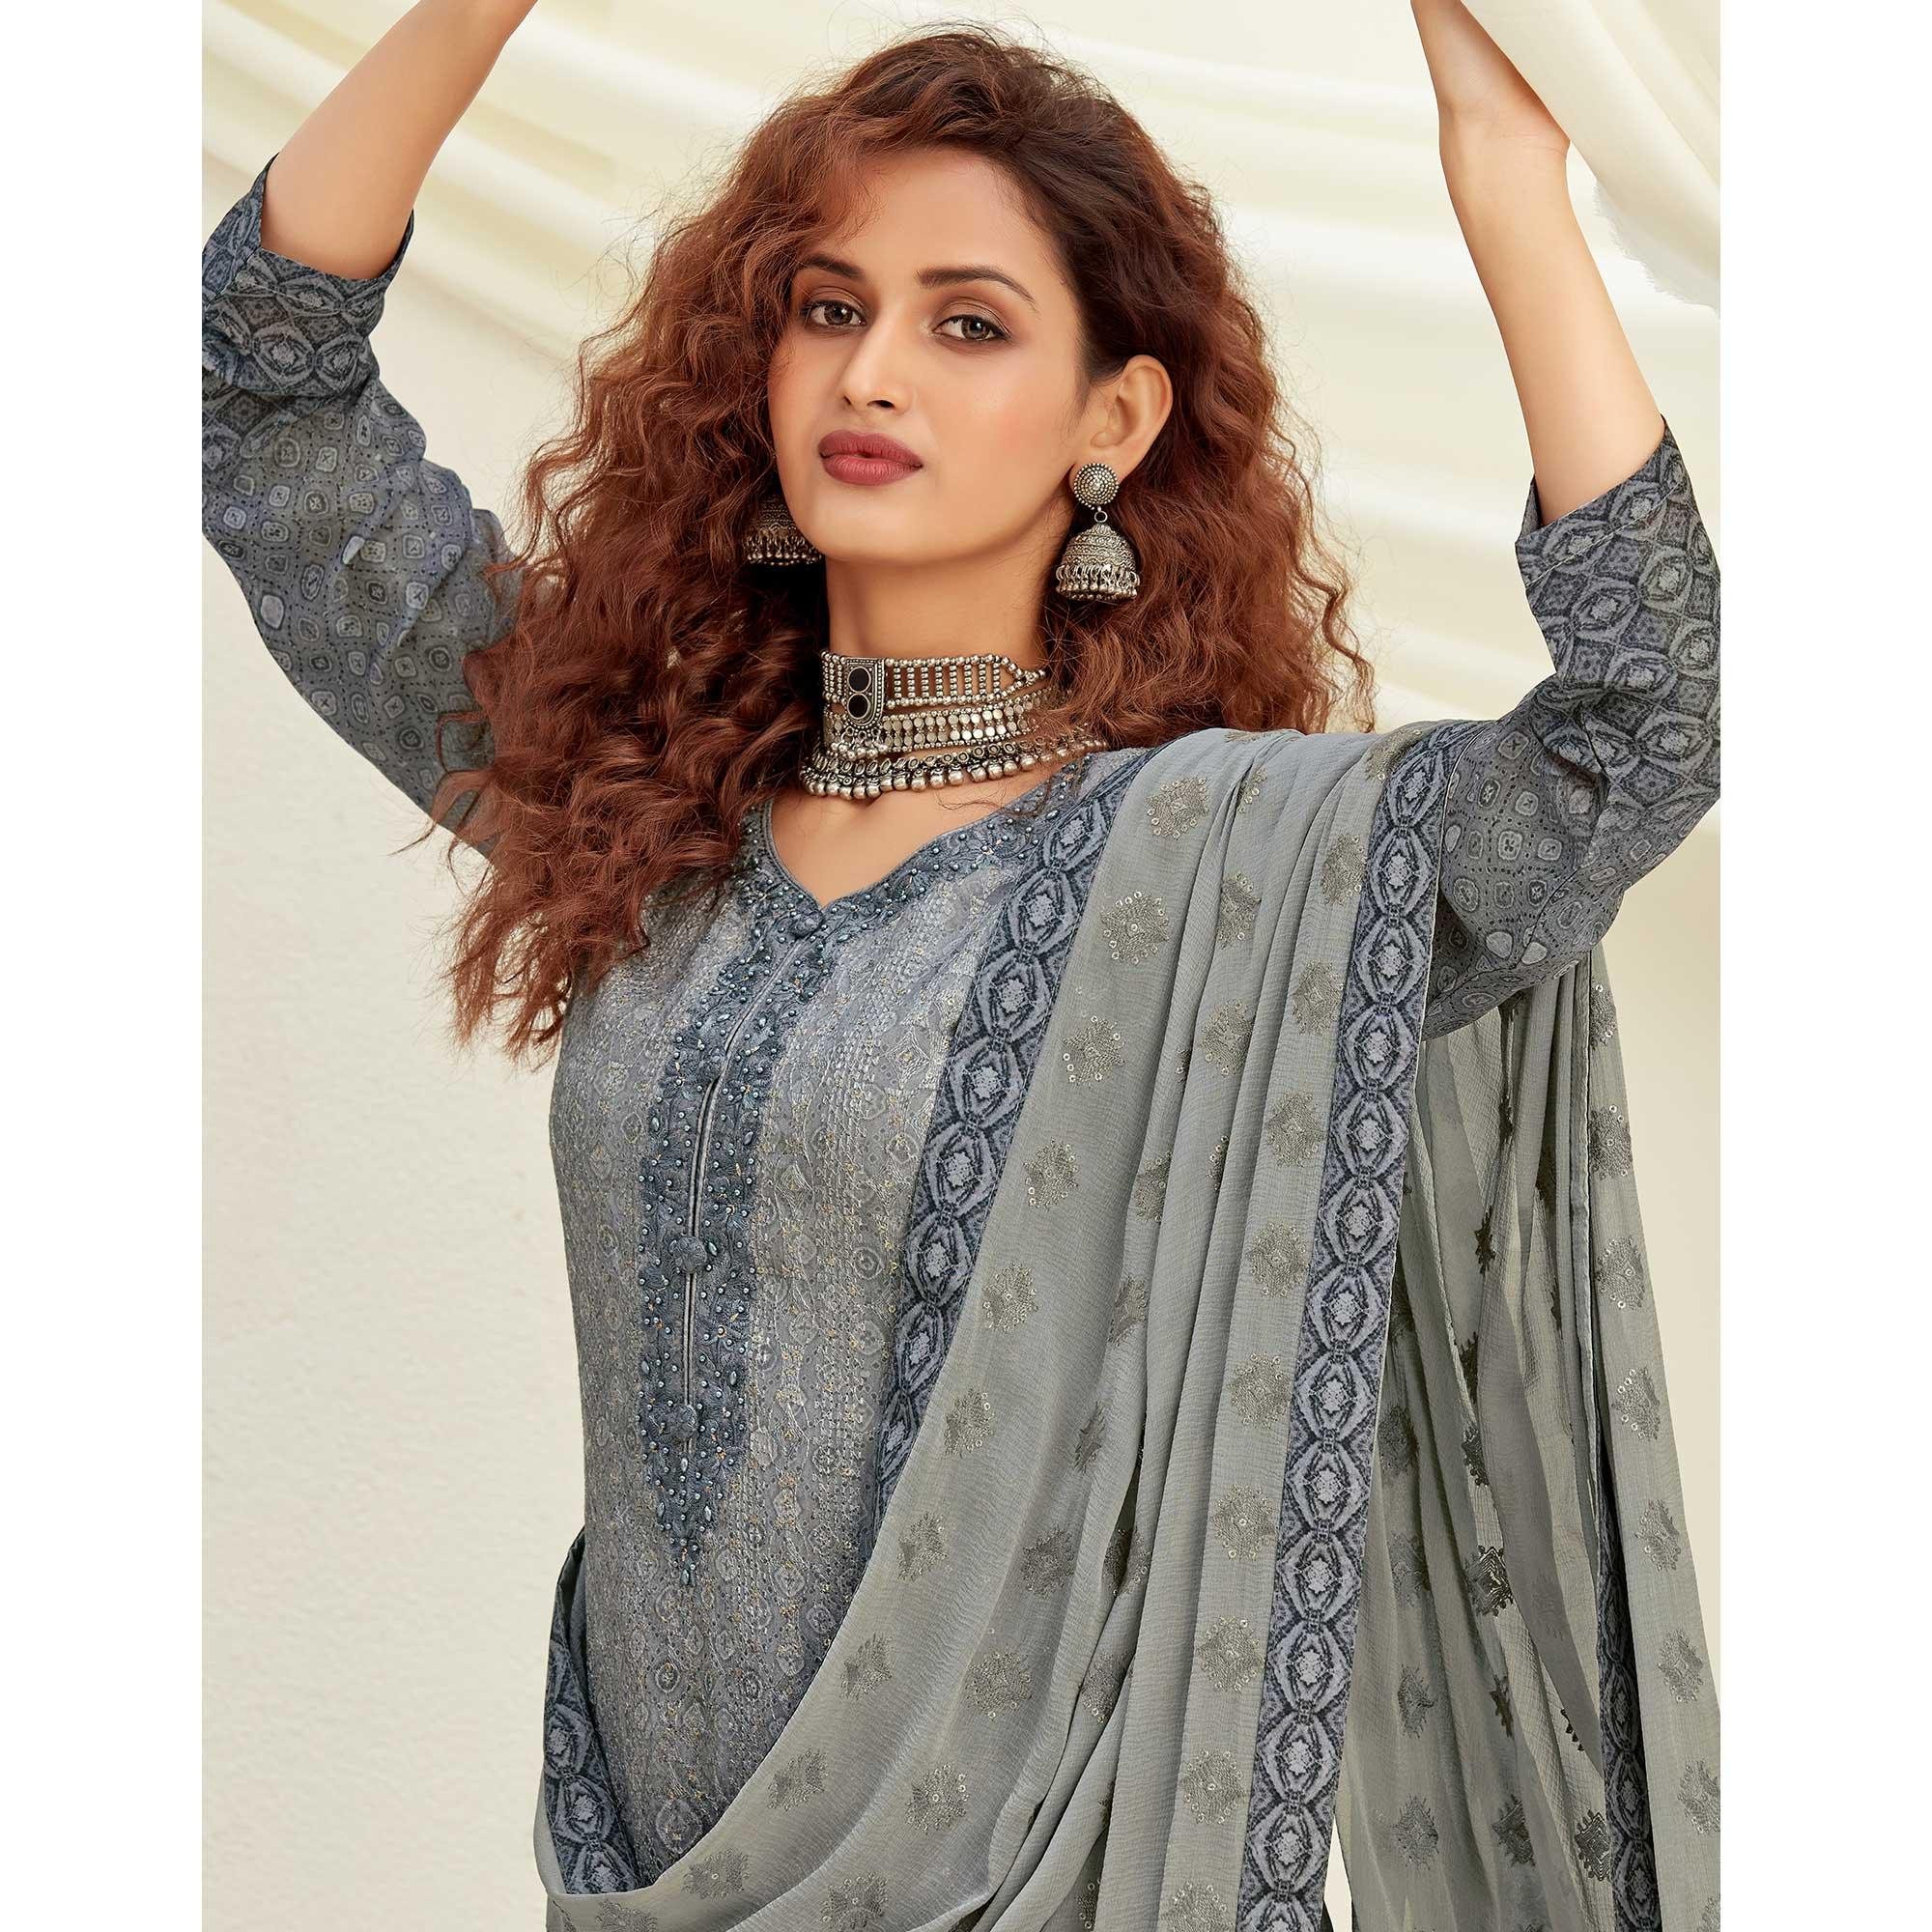 Desirable Grey Colored Embroidered With Digital Printed Partywear Pure Viscose Chinnon Chiffon Palazzo Suit - Peachmode